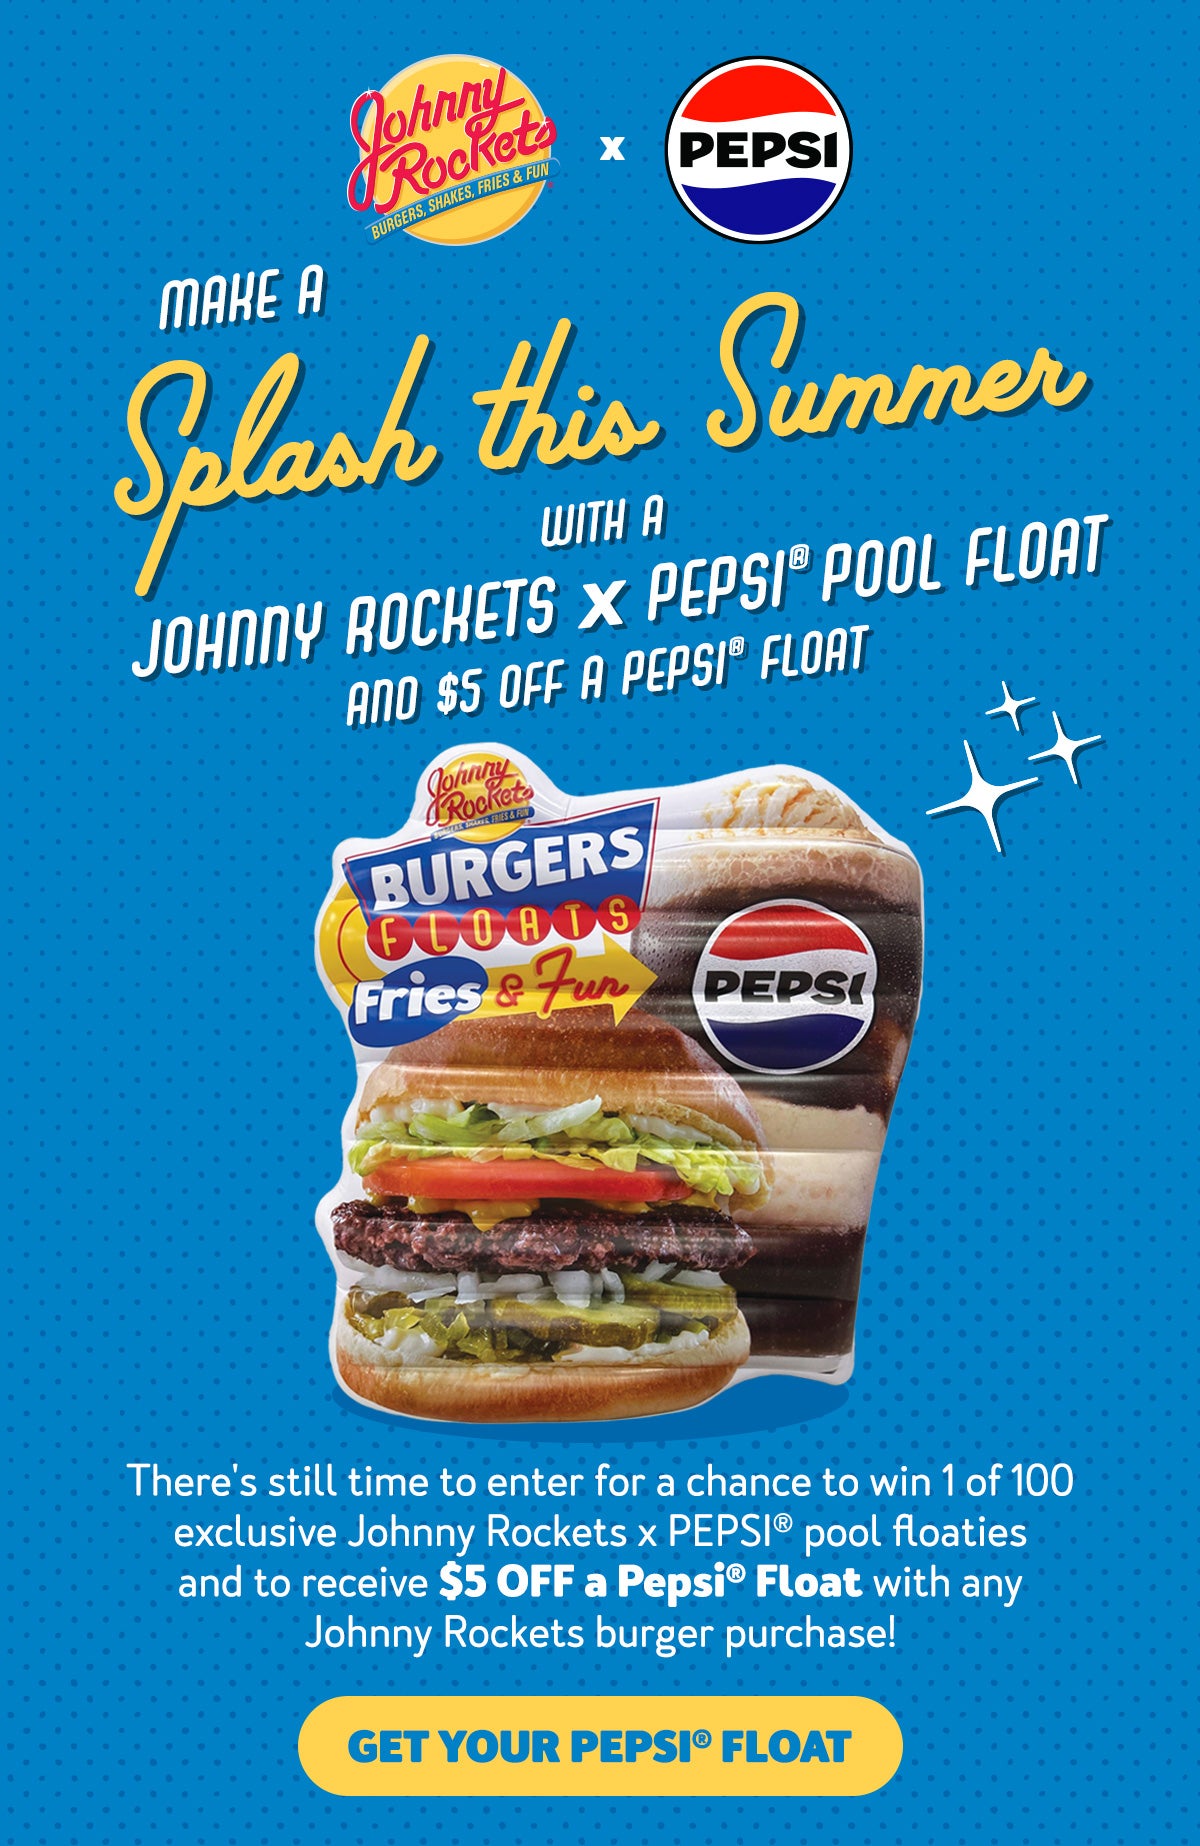 Make a Splash this Summer with a Johnny Rockets x PEPSI (R) Pool Float and $5 off a PEPSI(R) Float. There's still time to enter for a chance to win 1 of 100 exclusive Johnny Rockets x PEPSI(R) pool floaties and automatically receive $5 off a PEPSI(R) Float with any Johnny Rockets Burger purchase! Get Your PEPSI(R) Float.